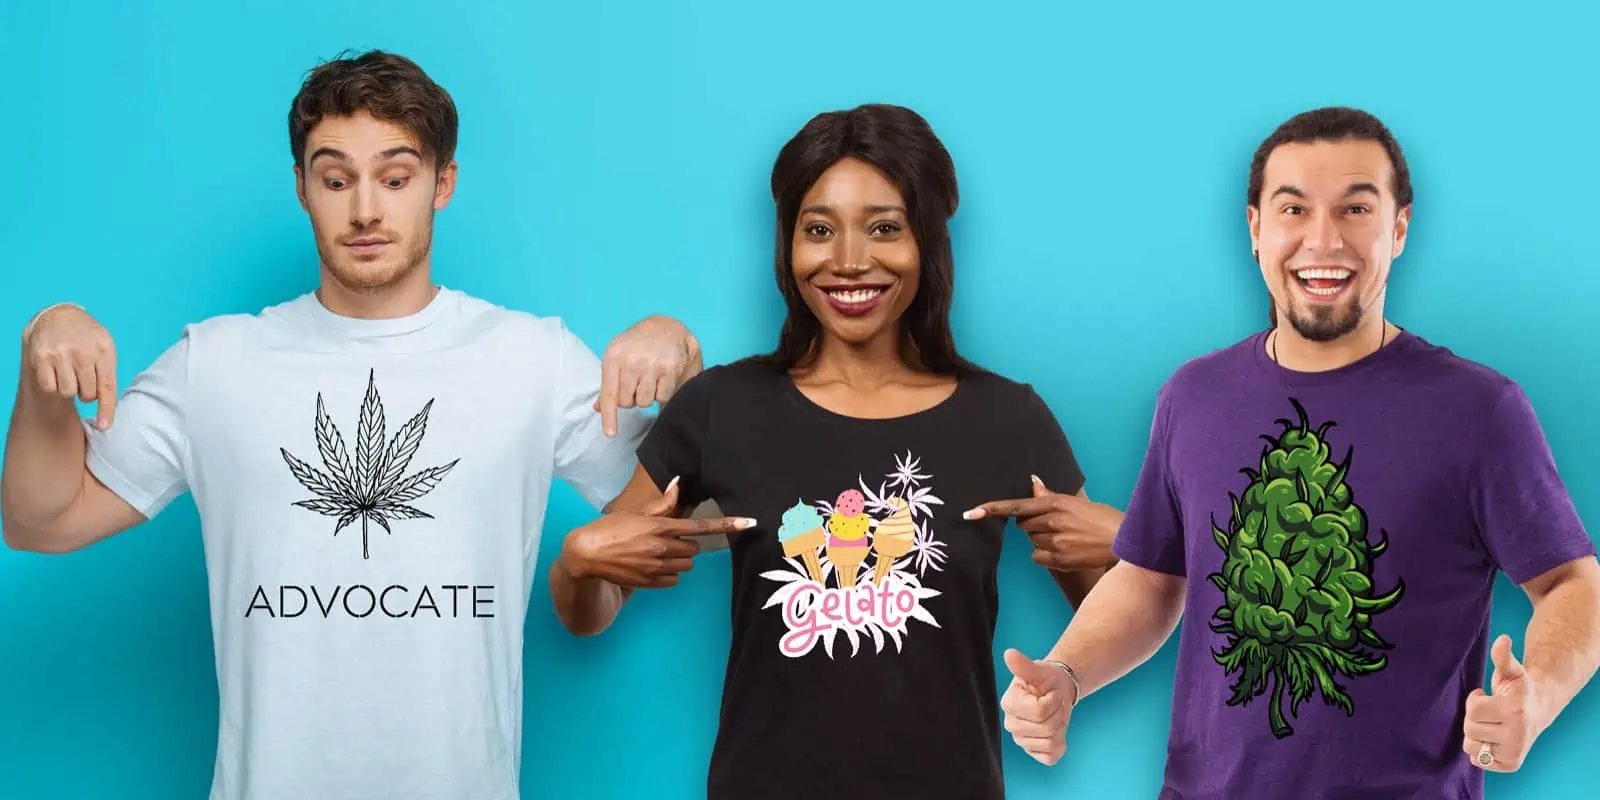 A group of three people consisting of two men and a woman against a blue background, pointing to their cannabis t-shirts, one which says "advocate" and another featuring a purple shirt with a big green nug printed front and center.